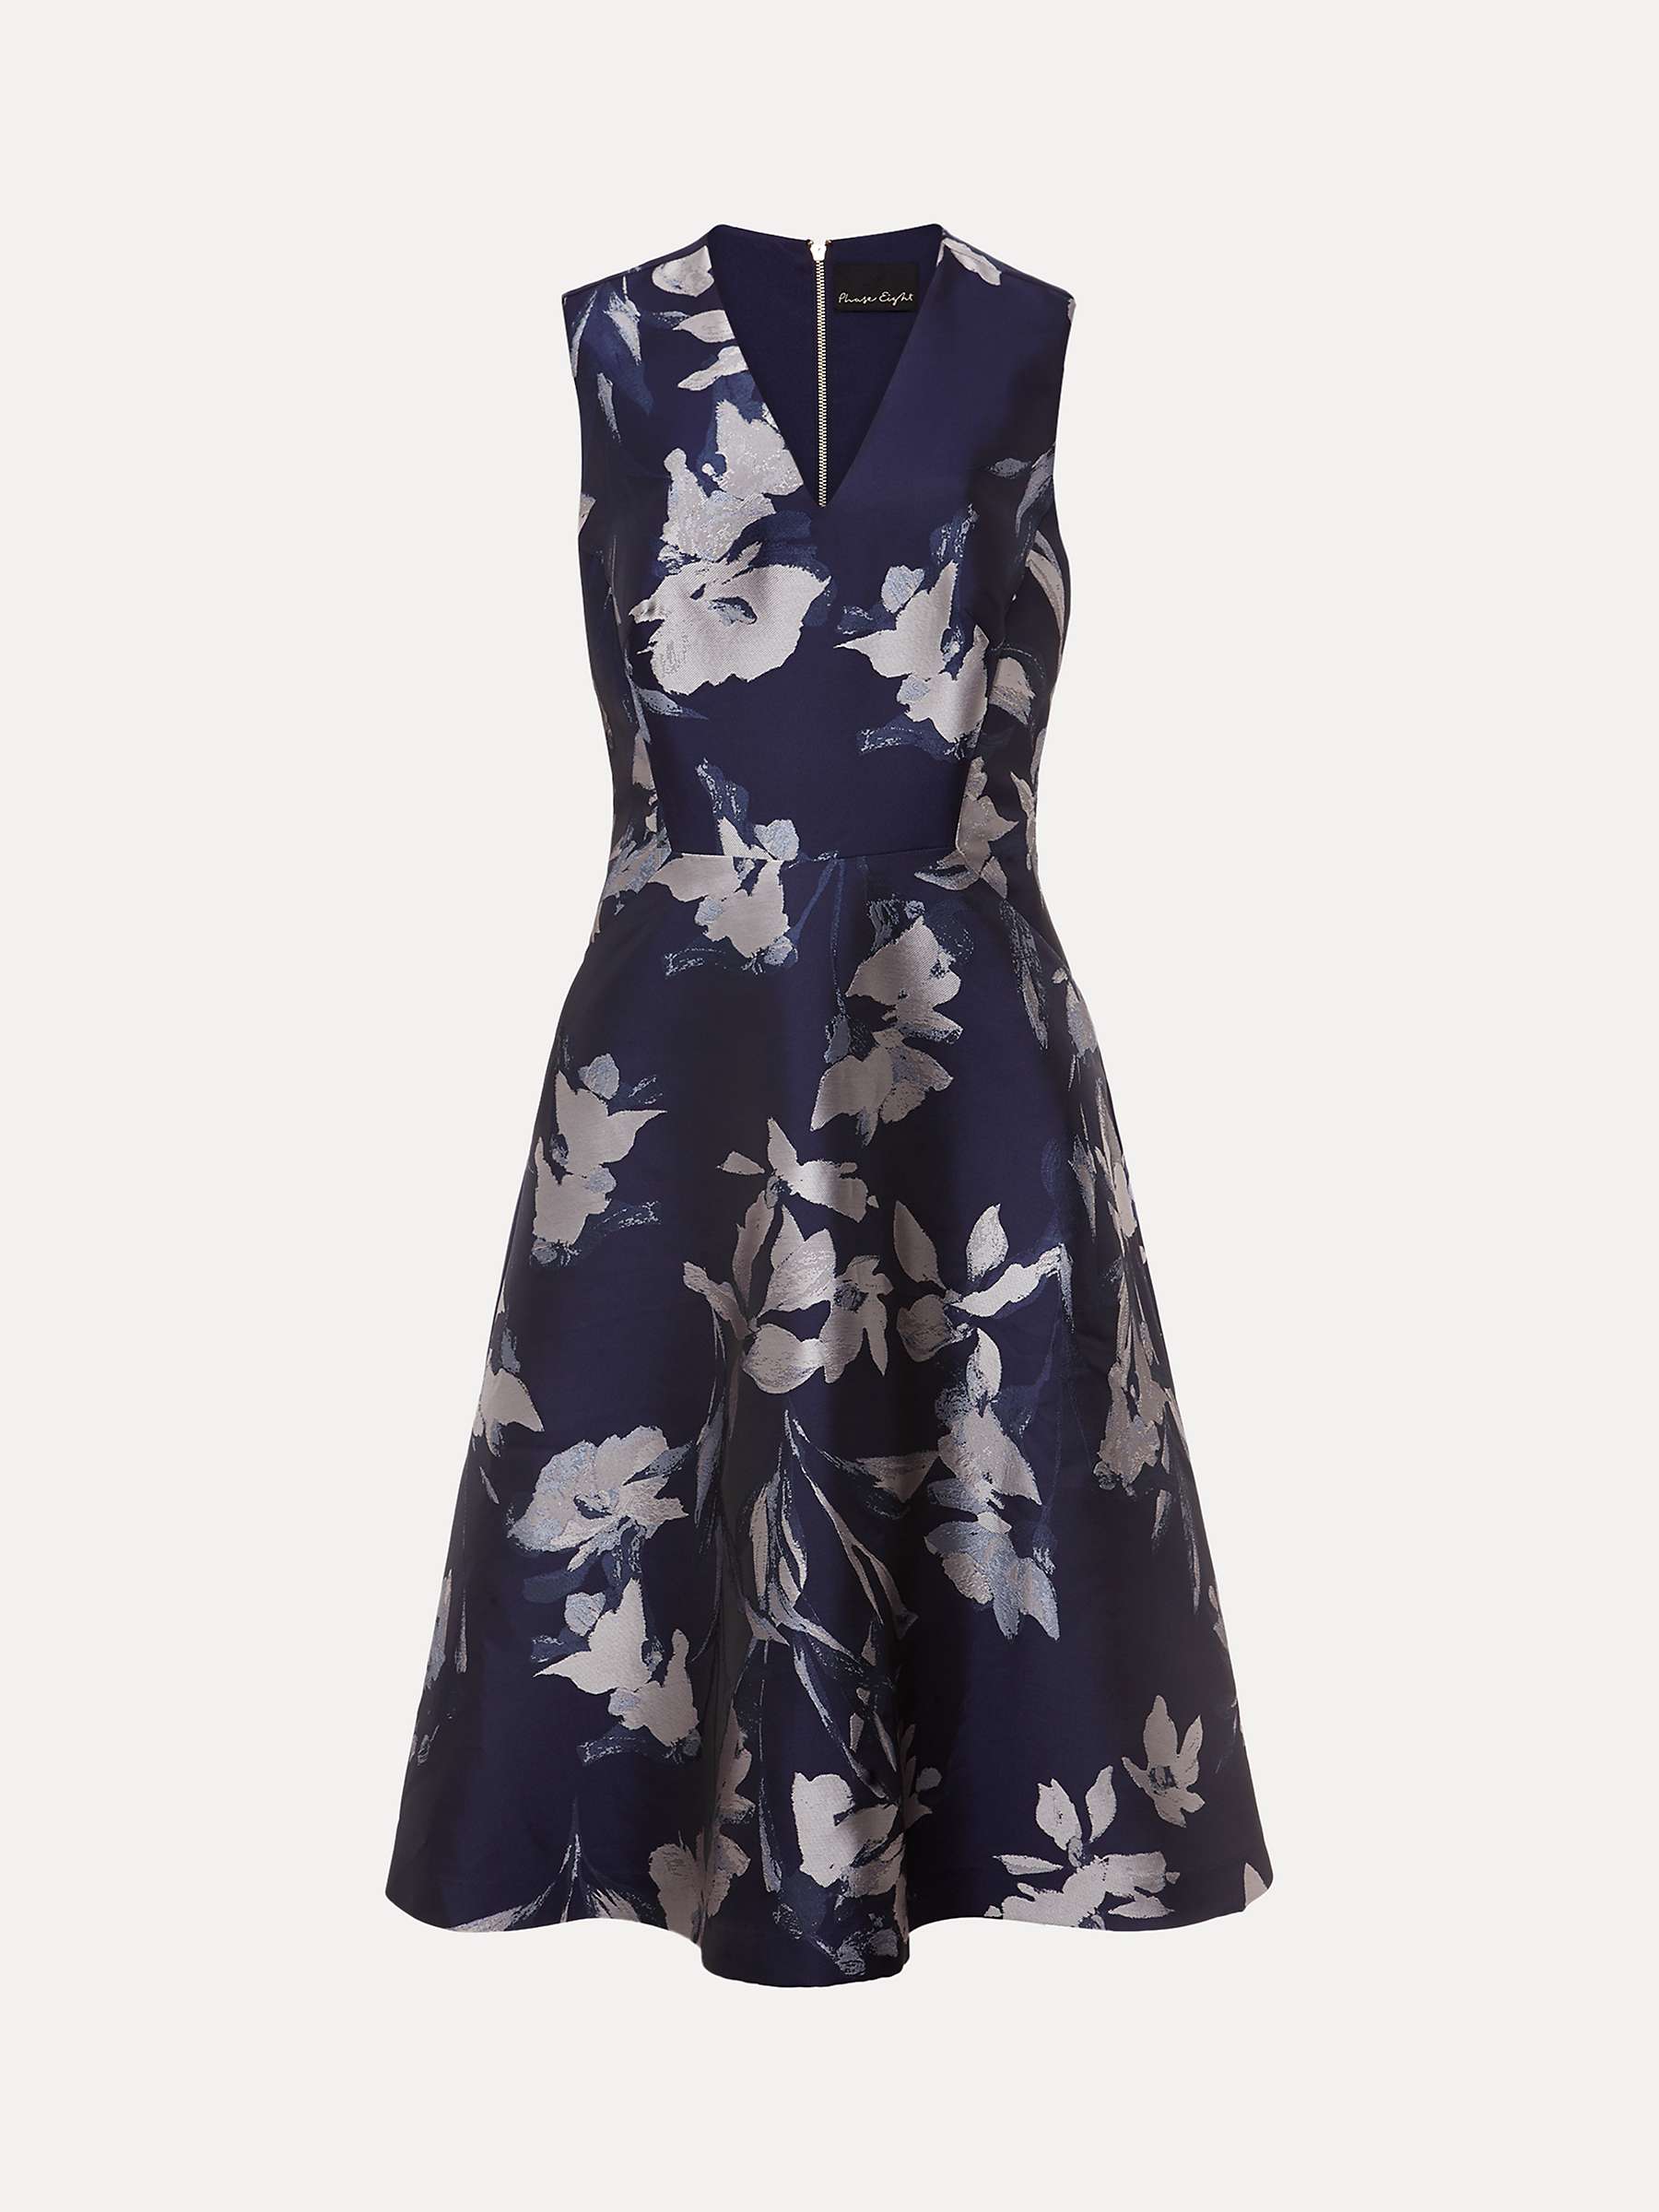 Buy Phase Eight Petite Cassy Floral Print Dress, Navy/Multi Online at johnlewis.com